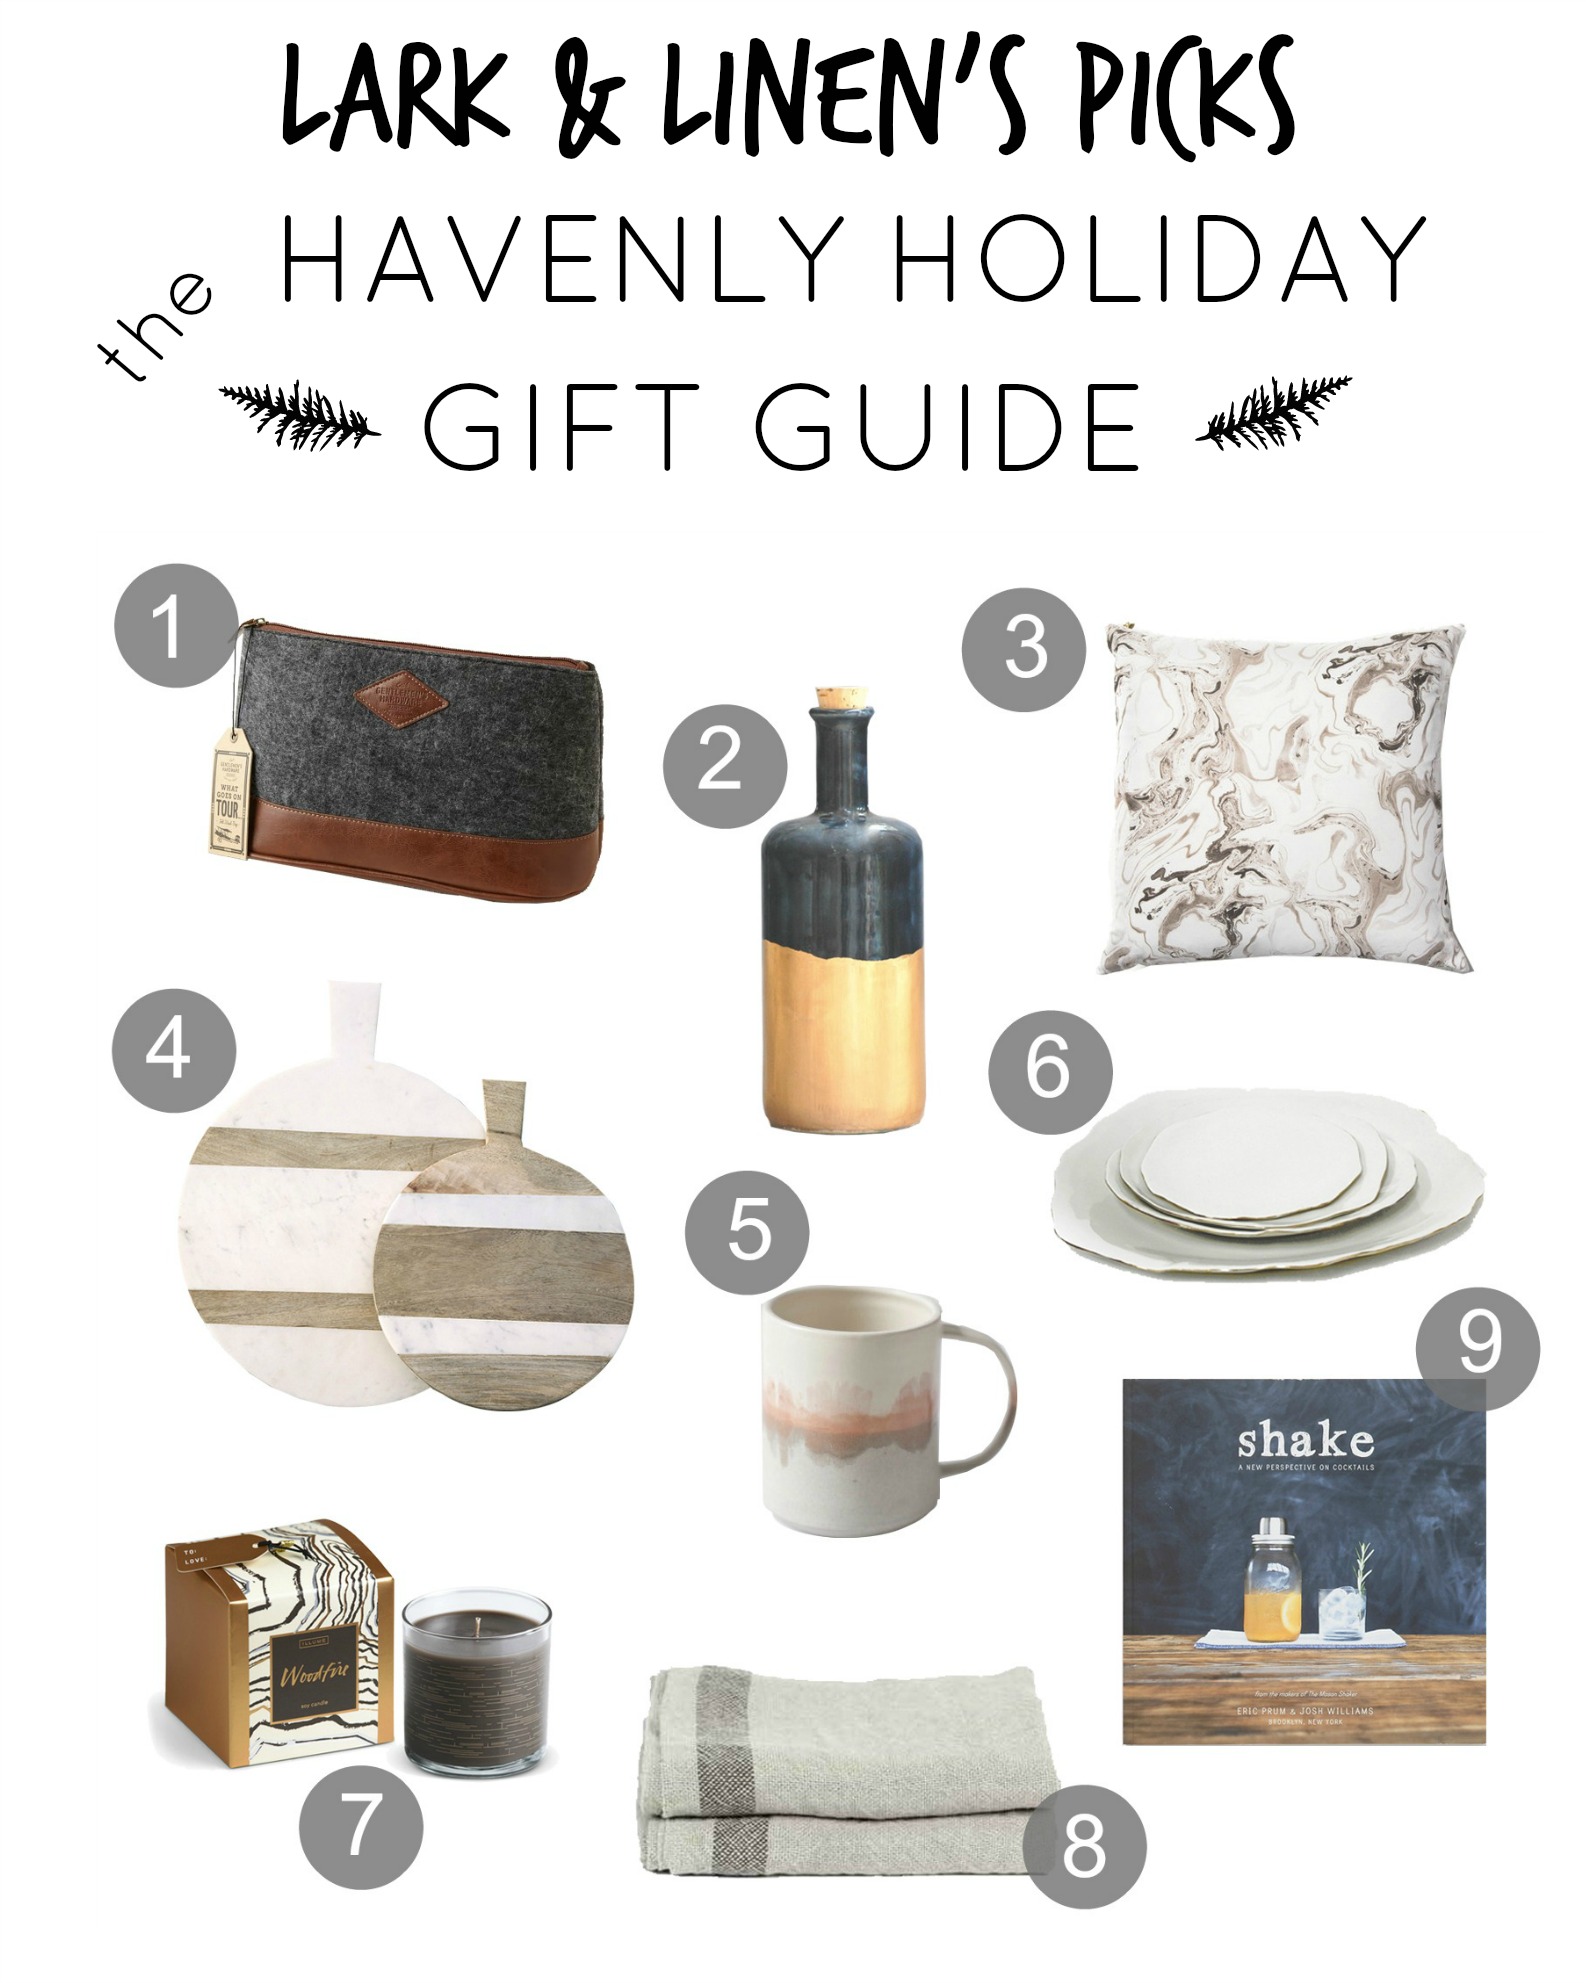 Havenly Holiday Gift Guide with Lark & Linen